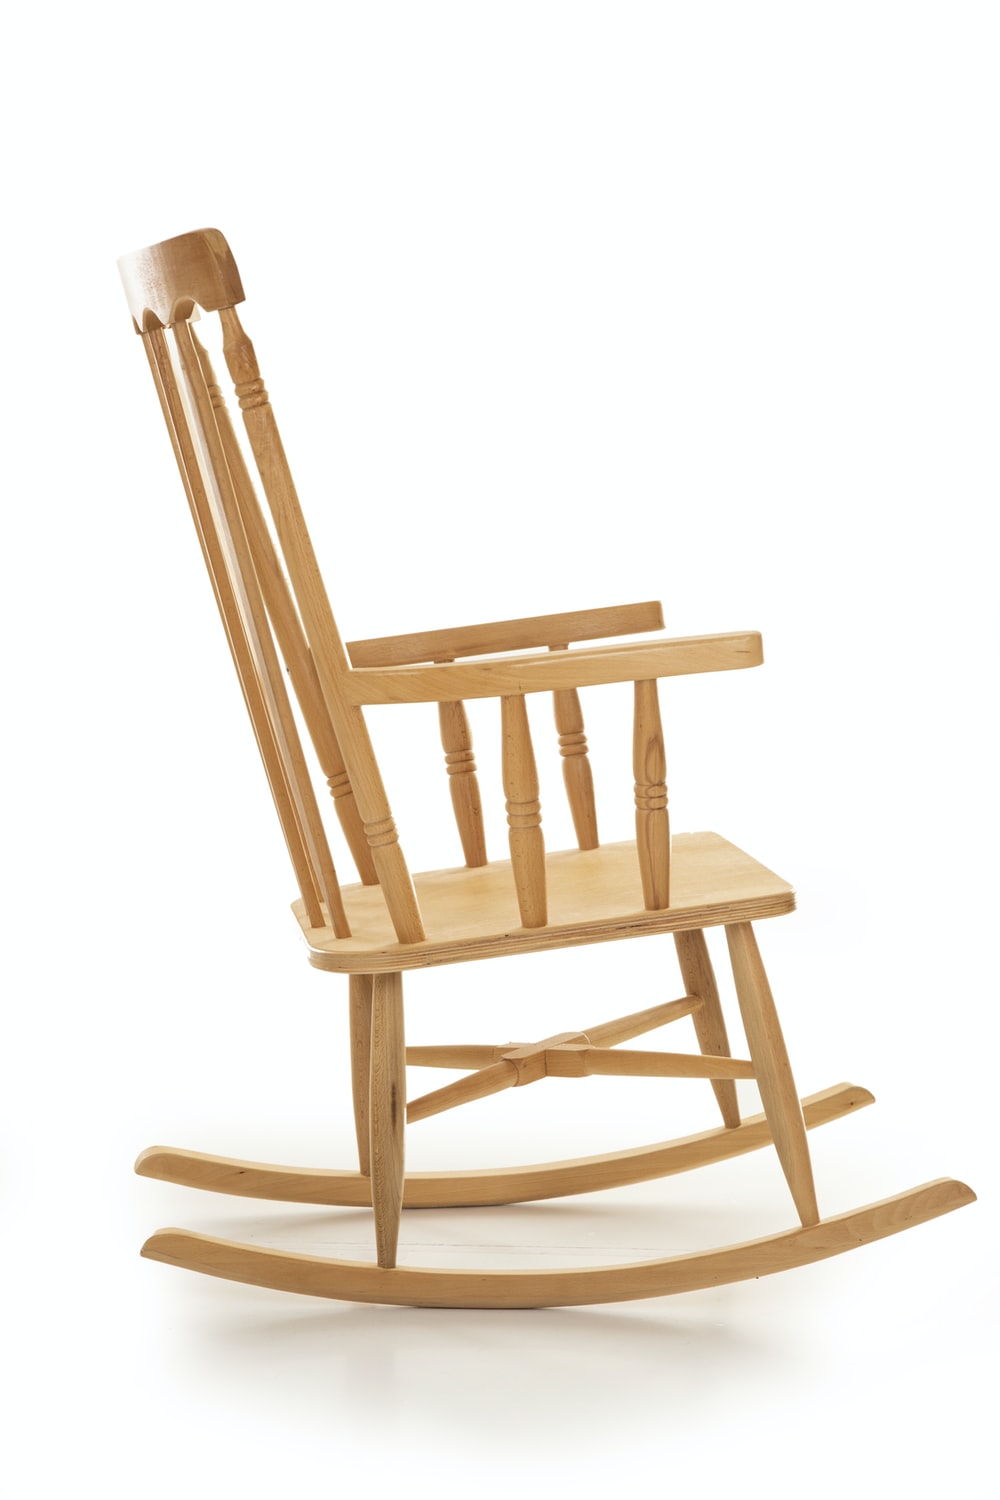 Rocking Chair Images